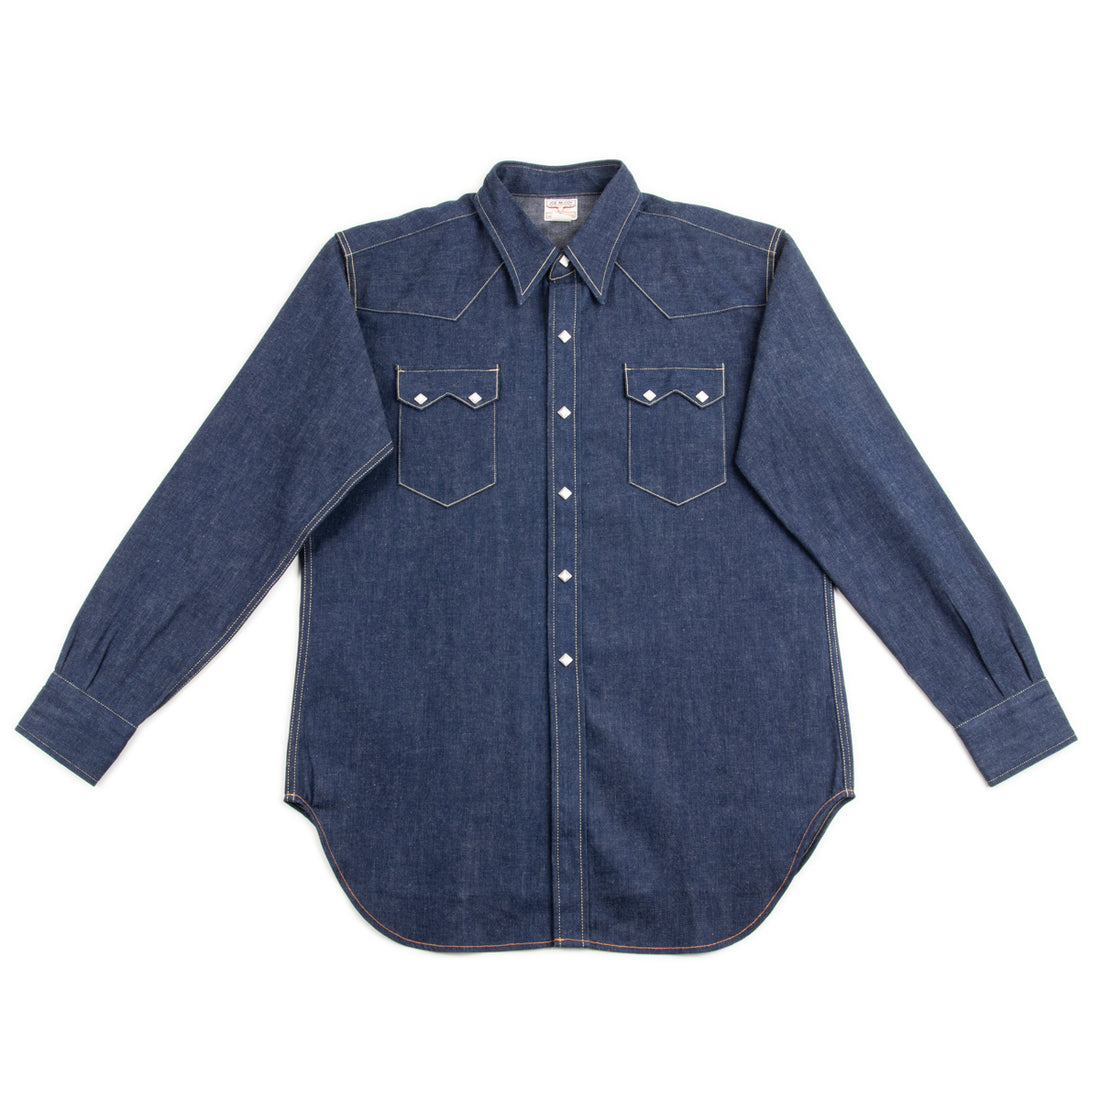 The Western Shirt in Indigo Crepe, The Sea Ranch Collection